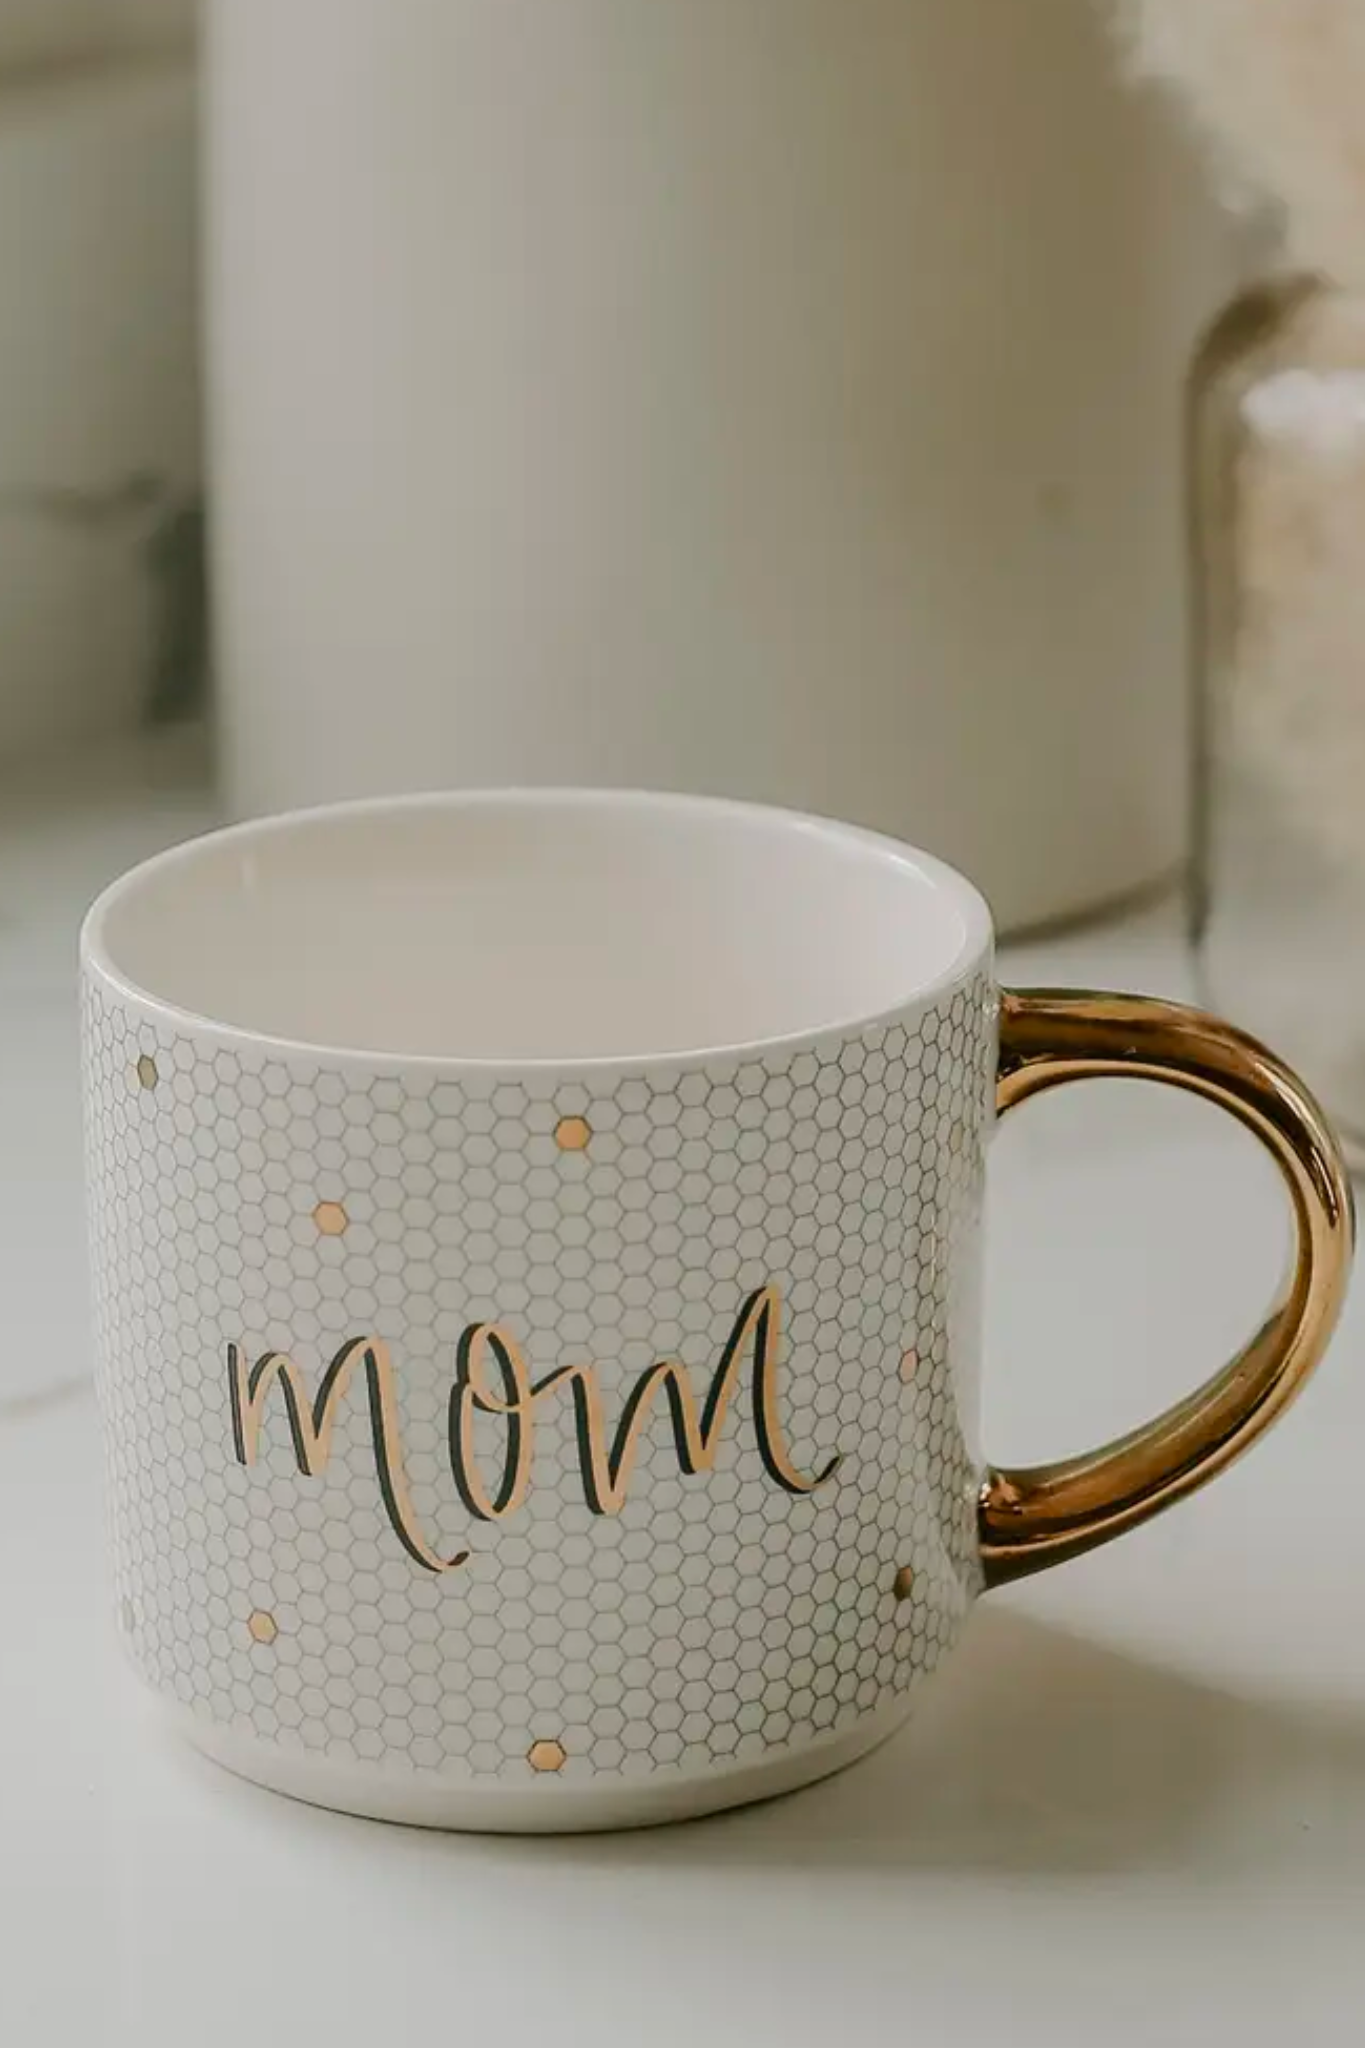 View 1 of Mom Tiled Mug, a Home & Decor from Larrea Cove. Detail: The Mom Tiled Mug from brings sophistication and style to mornings or afternoo...